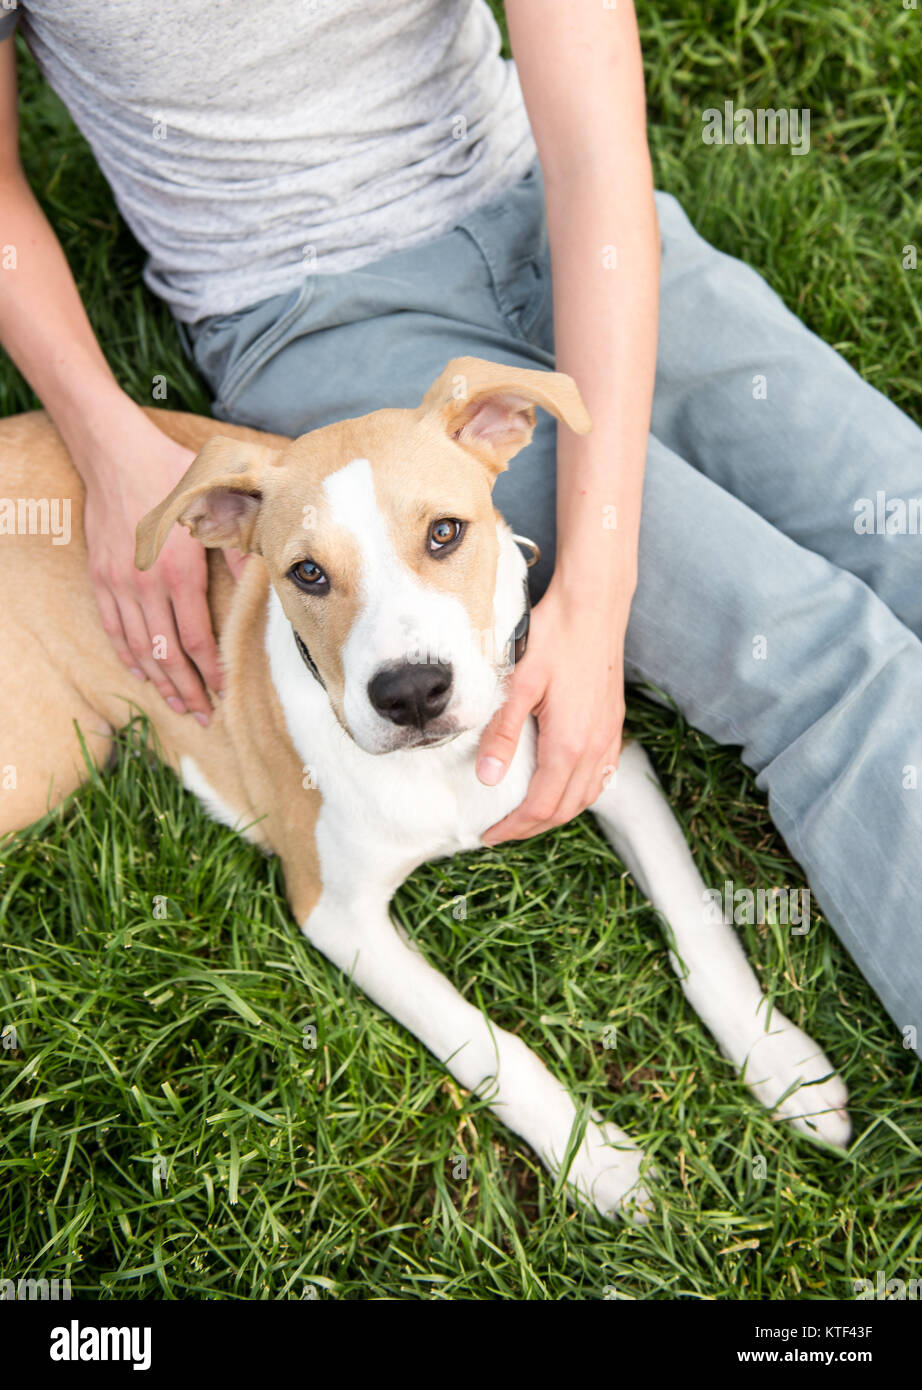 Cute Young Dog Laying Down Next to Human Friend Stock Photo